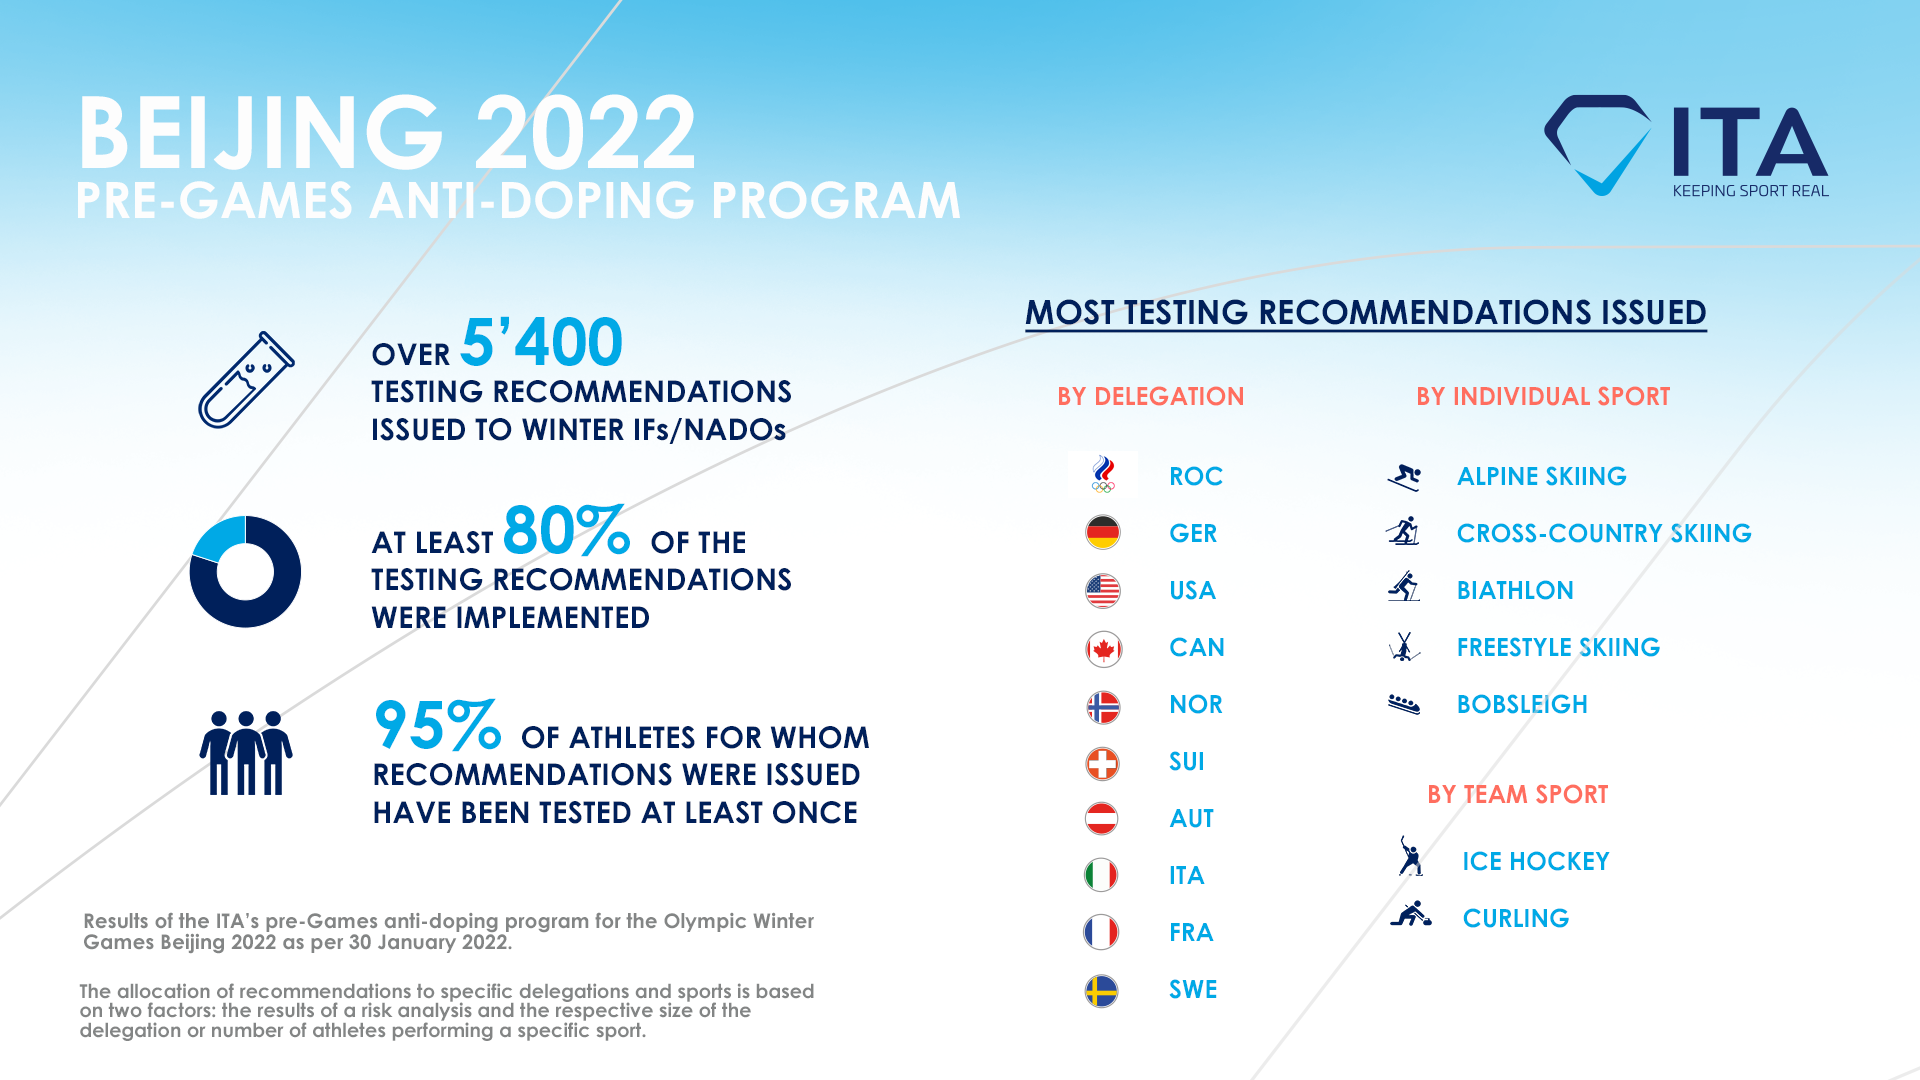 The ITA completes its pre-Games program for Beijing 2022 with an implementation rate of 80% of its testing recommendations